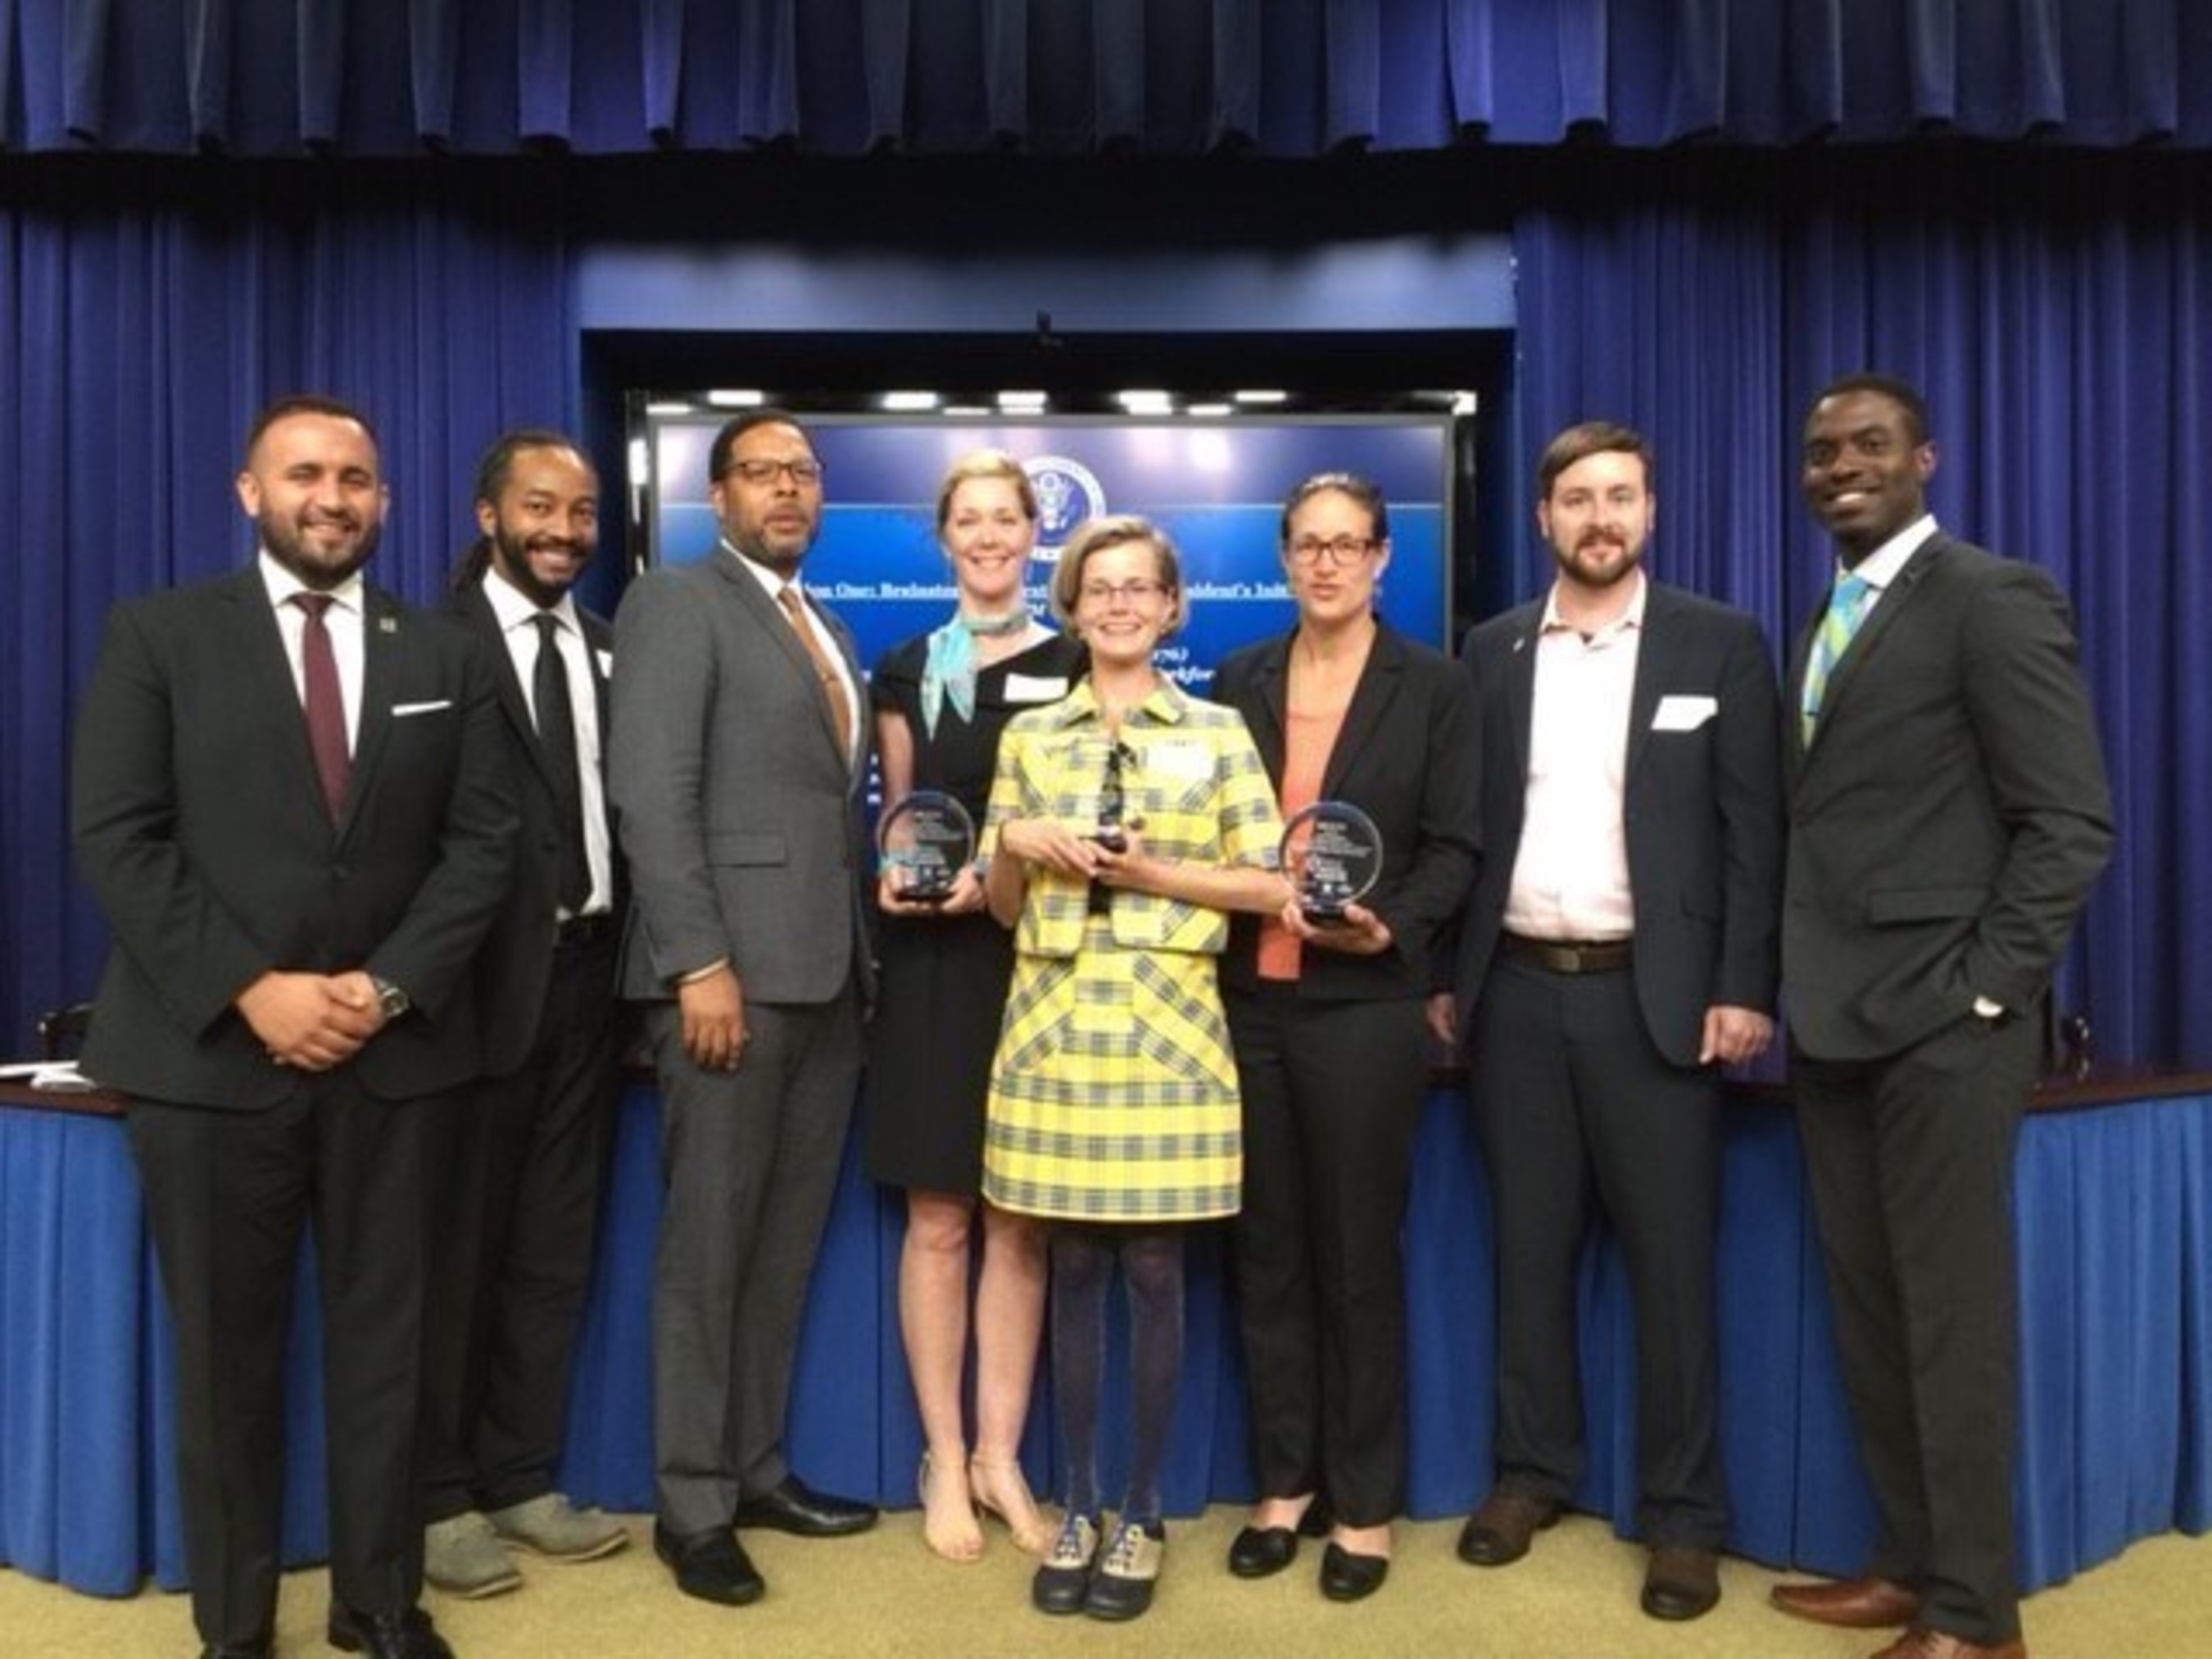 The CH2M Foundation, The Nature Conservancy and W.B. Saul High School in Philadelphia receive award for innovative, cross-sectoral approach to connecting students to real-world STEM learning opportunities.